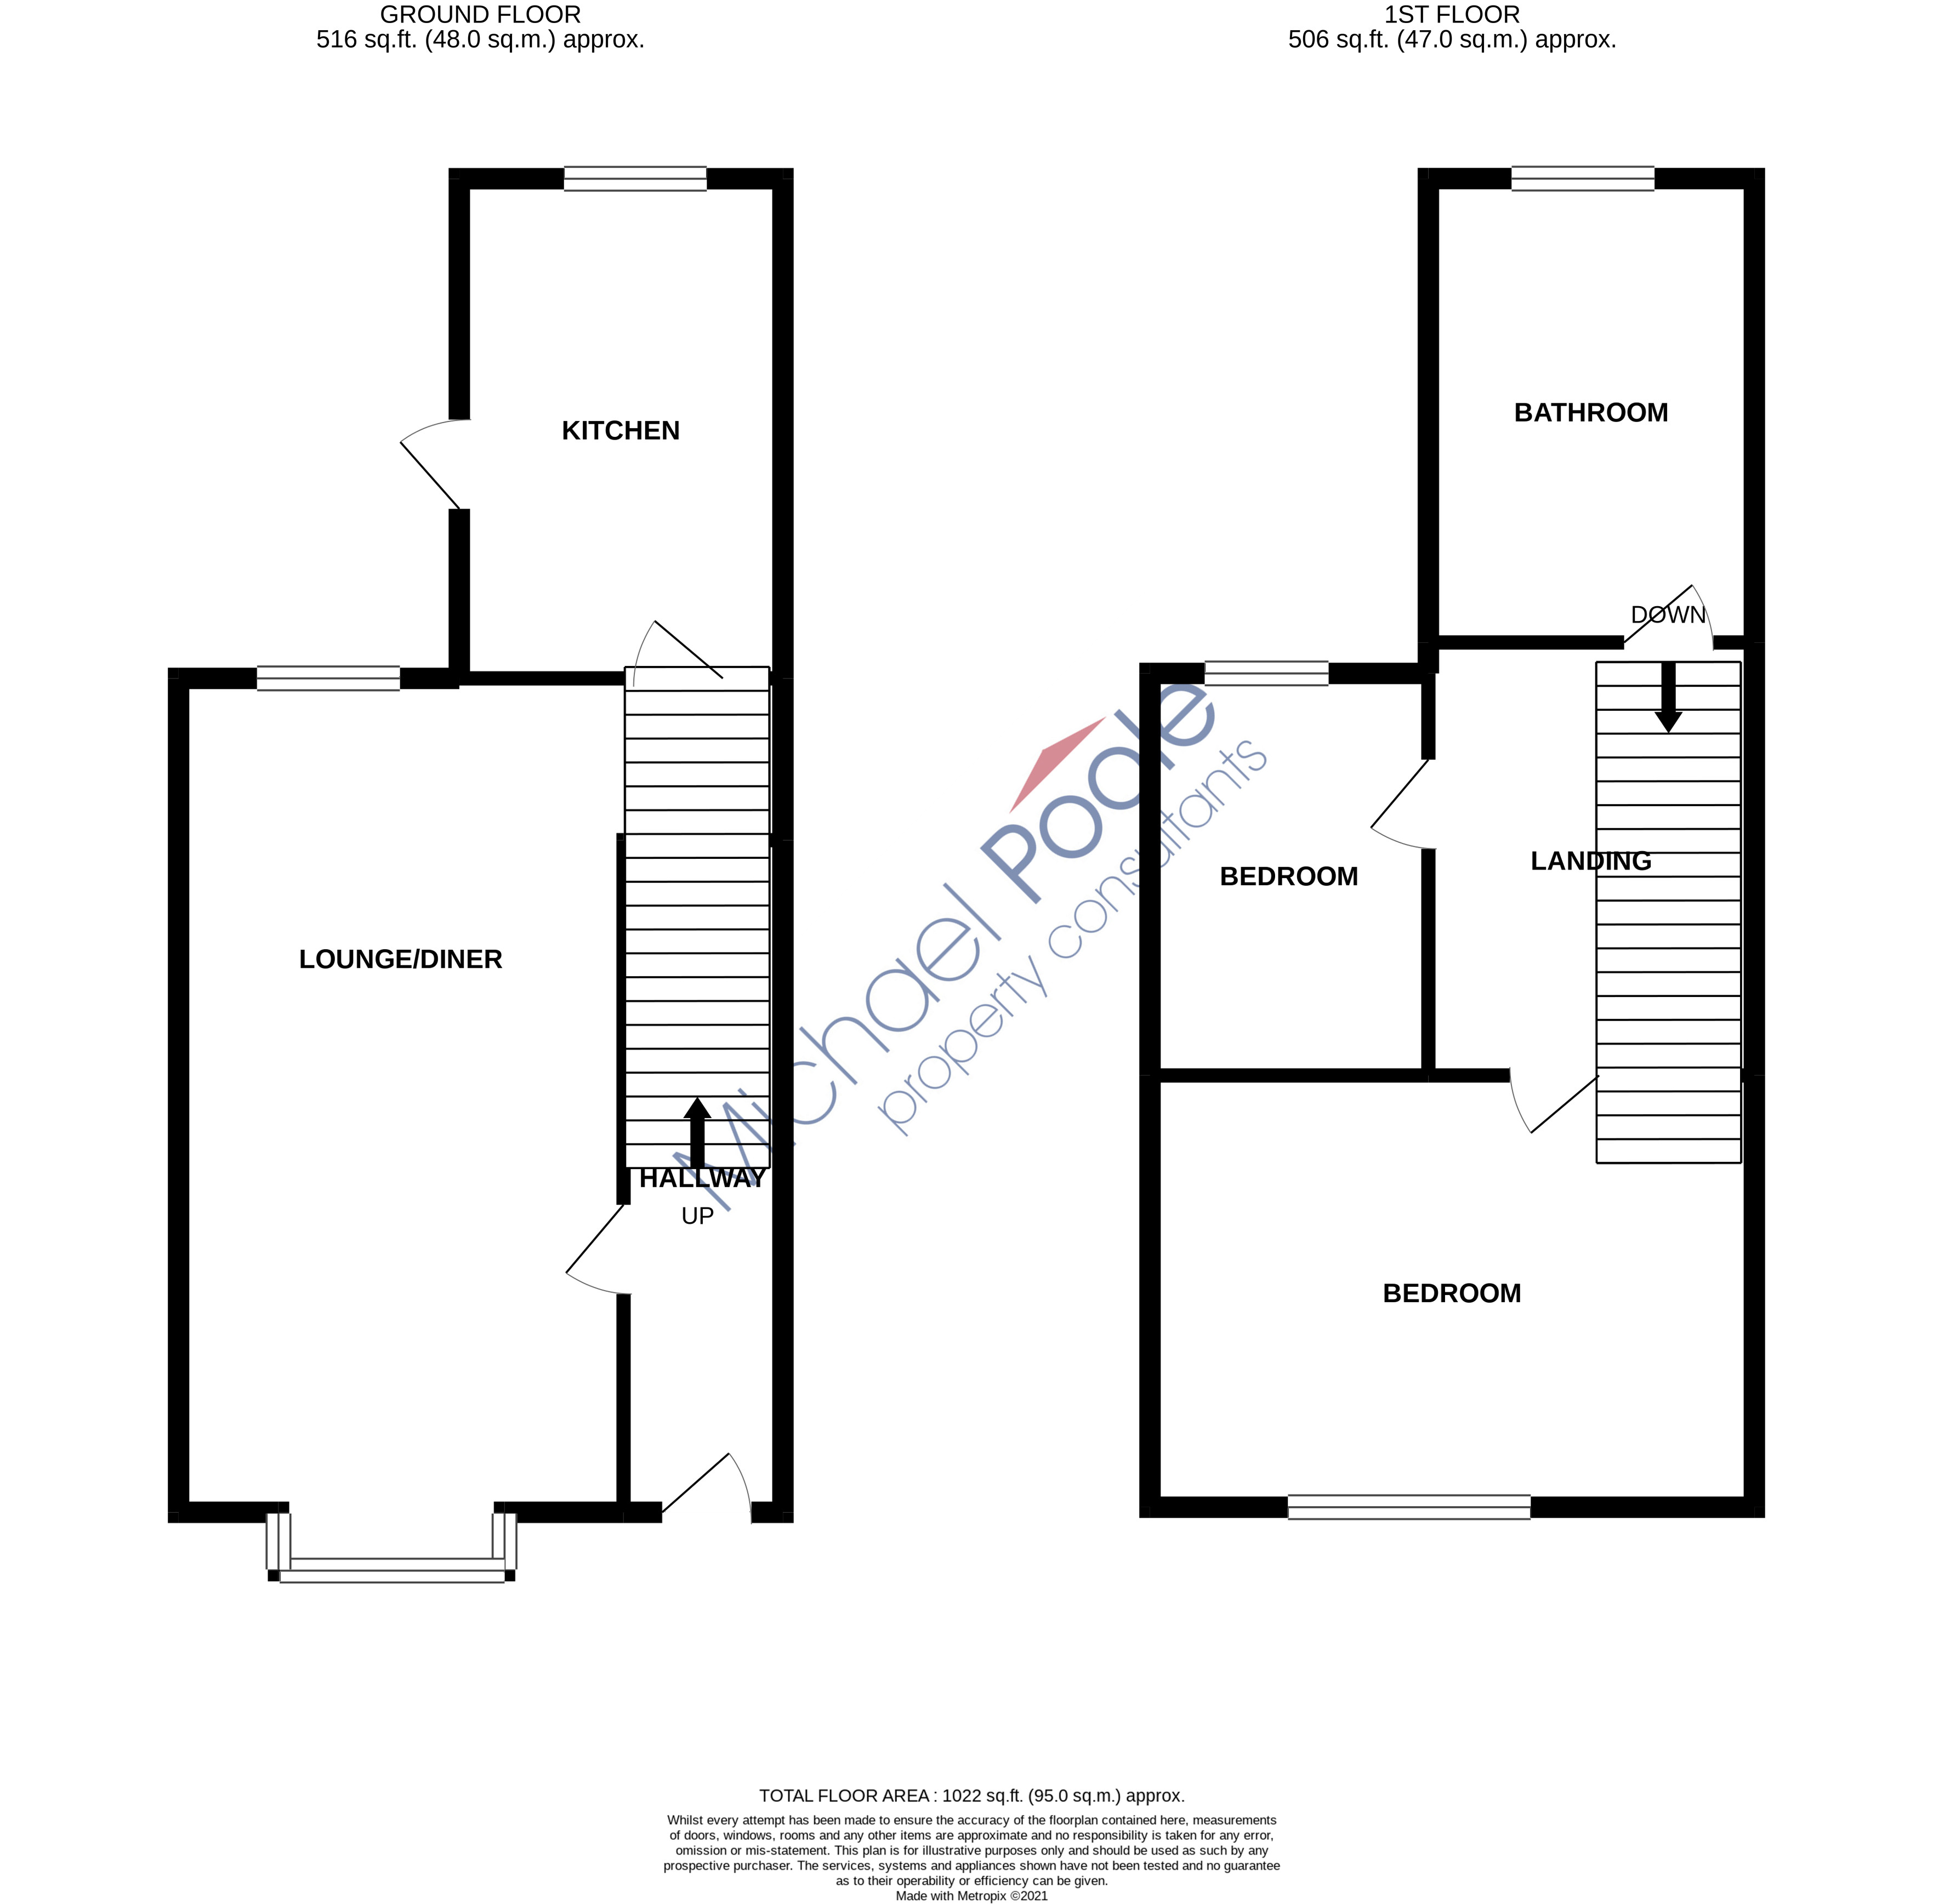 2 bed house to rent - Property floorplan